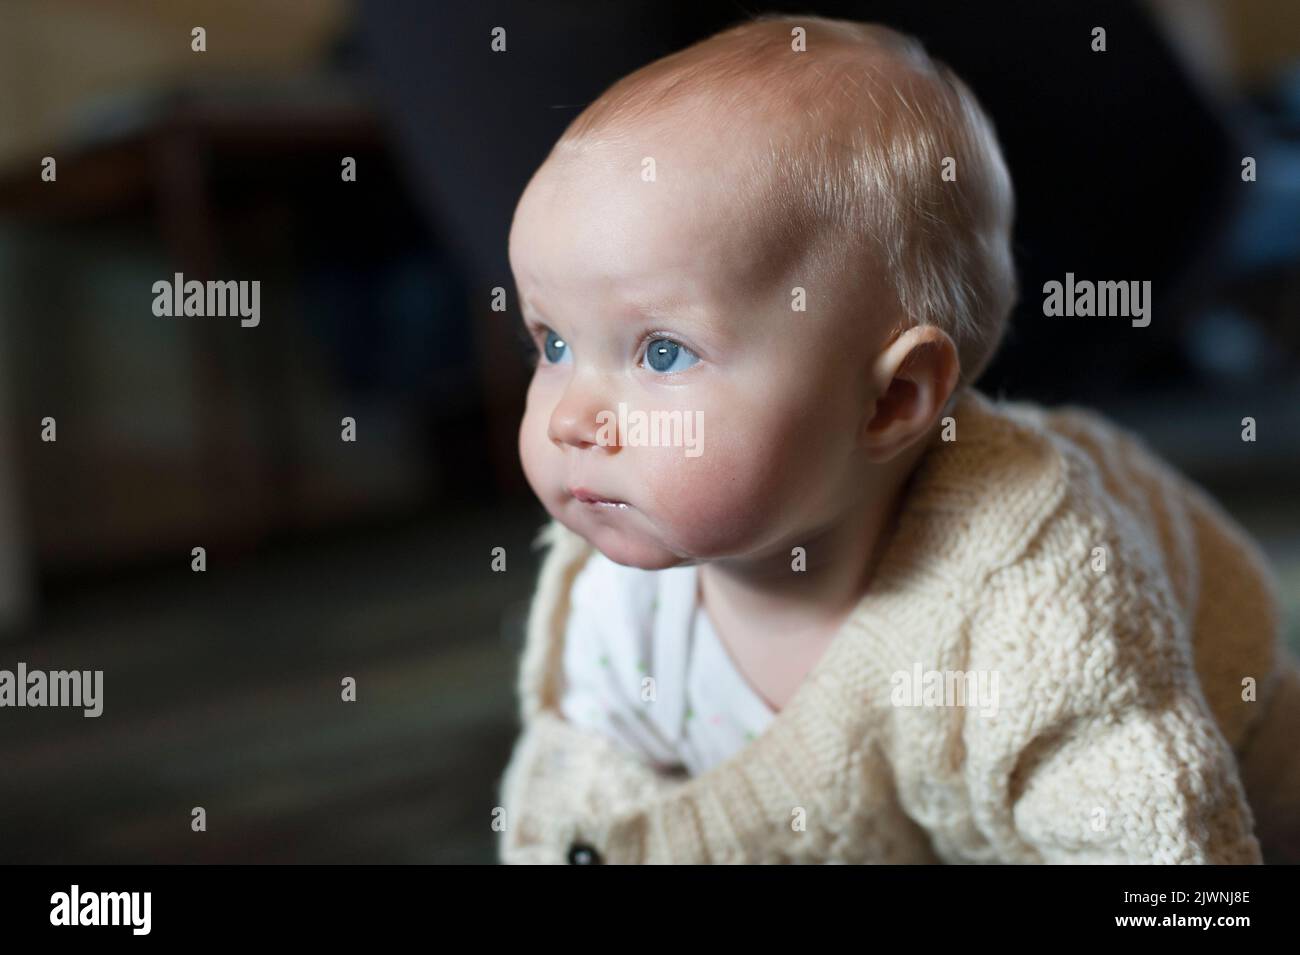 Portrait of a blond eight-month-old baby crawling, looking intensely at her destination. Stock Photo